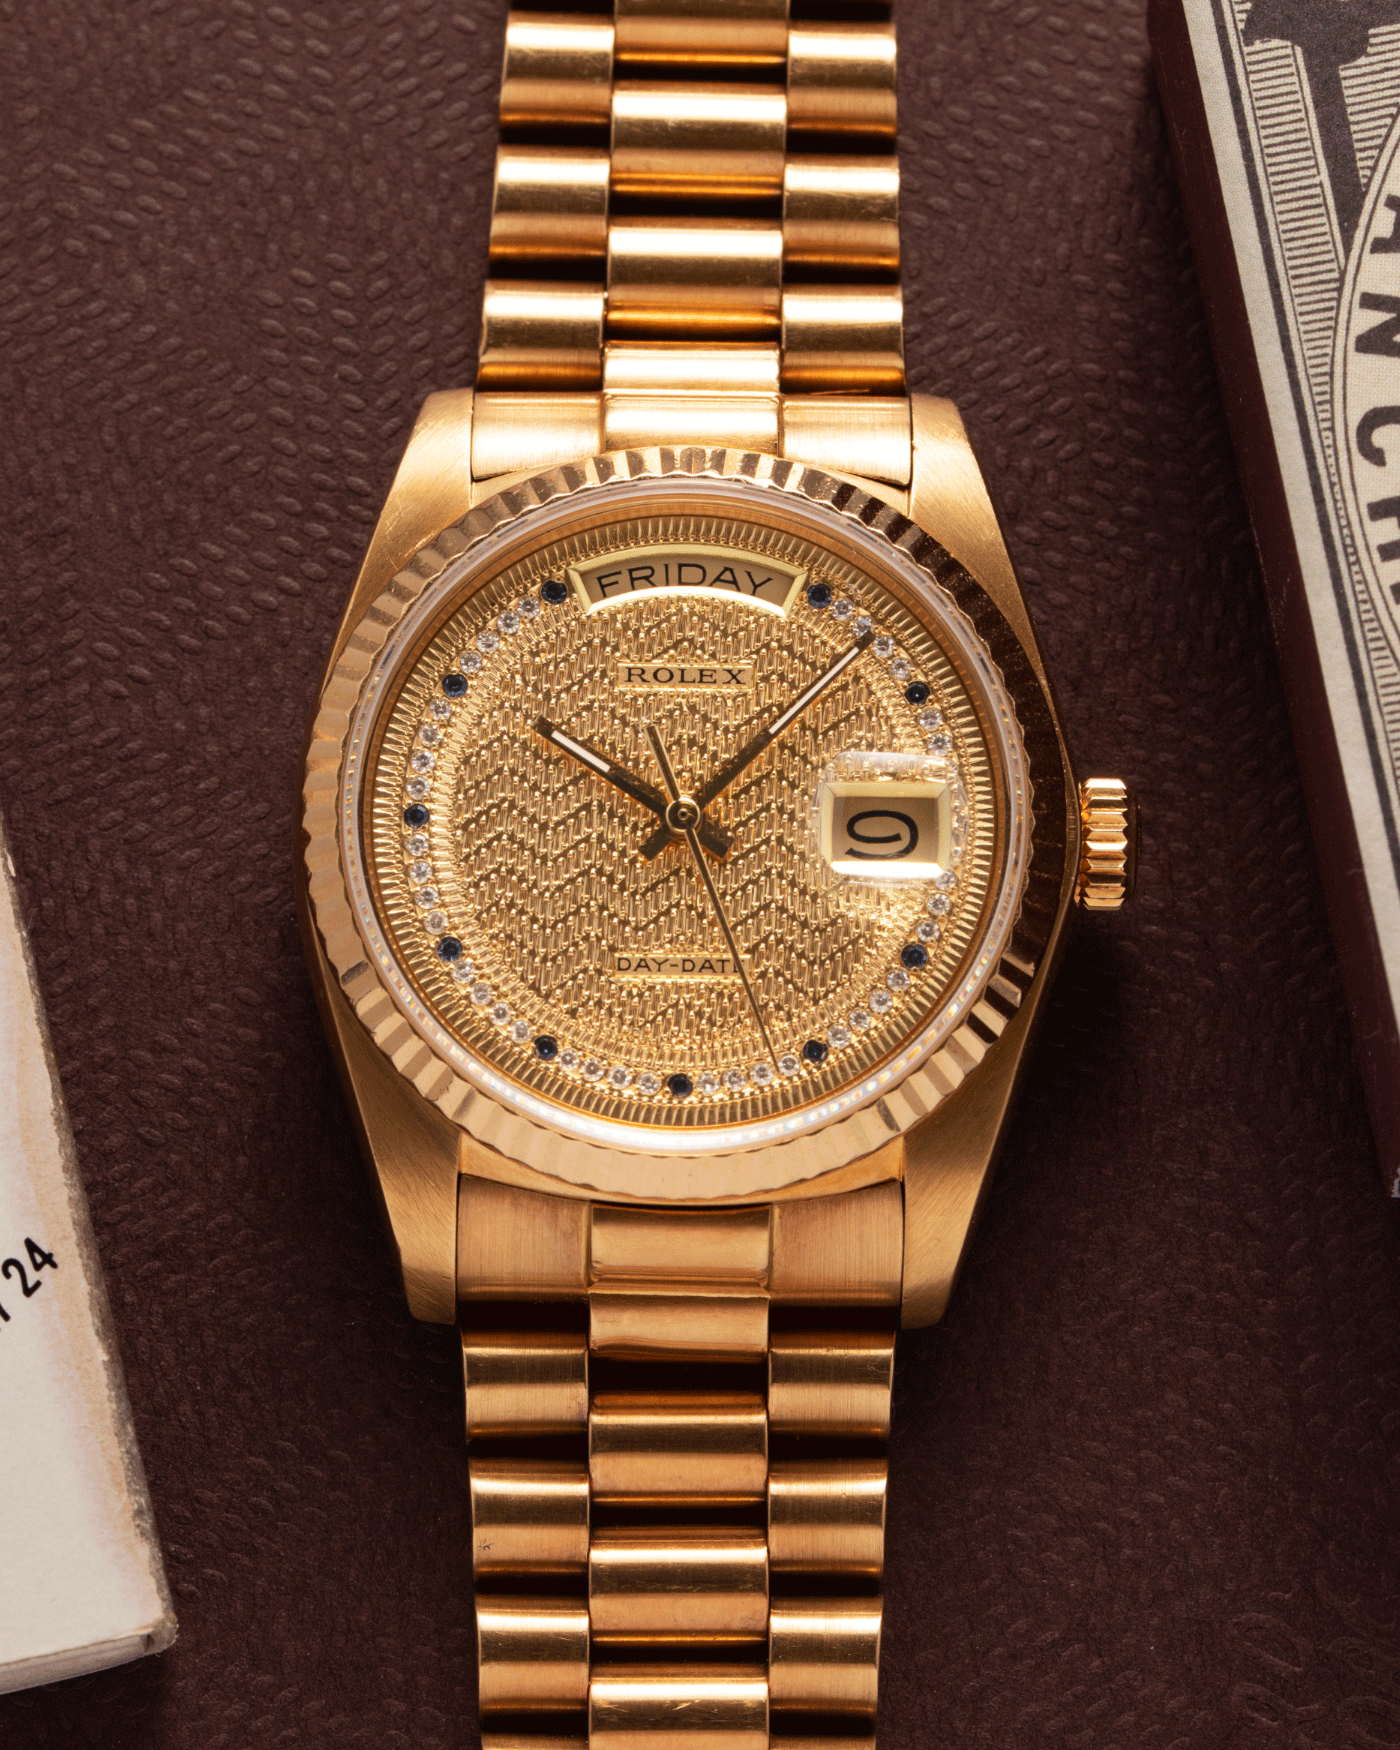 Brand: Rolex Year: 1987 Model: Day Date Reference Number: 18038 Serial Number: 9,6XX,XXX Material: 18k Yellow Gold Movement: Cal. 3055 Case Diameter: 36mm Lug Width: 20mm Bracelet/Strap: Rolex 18k Solid Gold President Bracelet